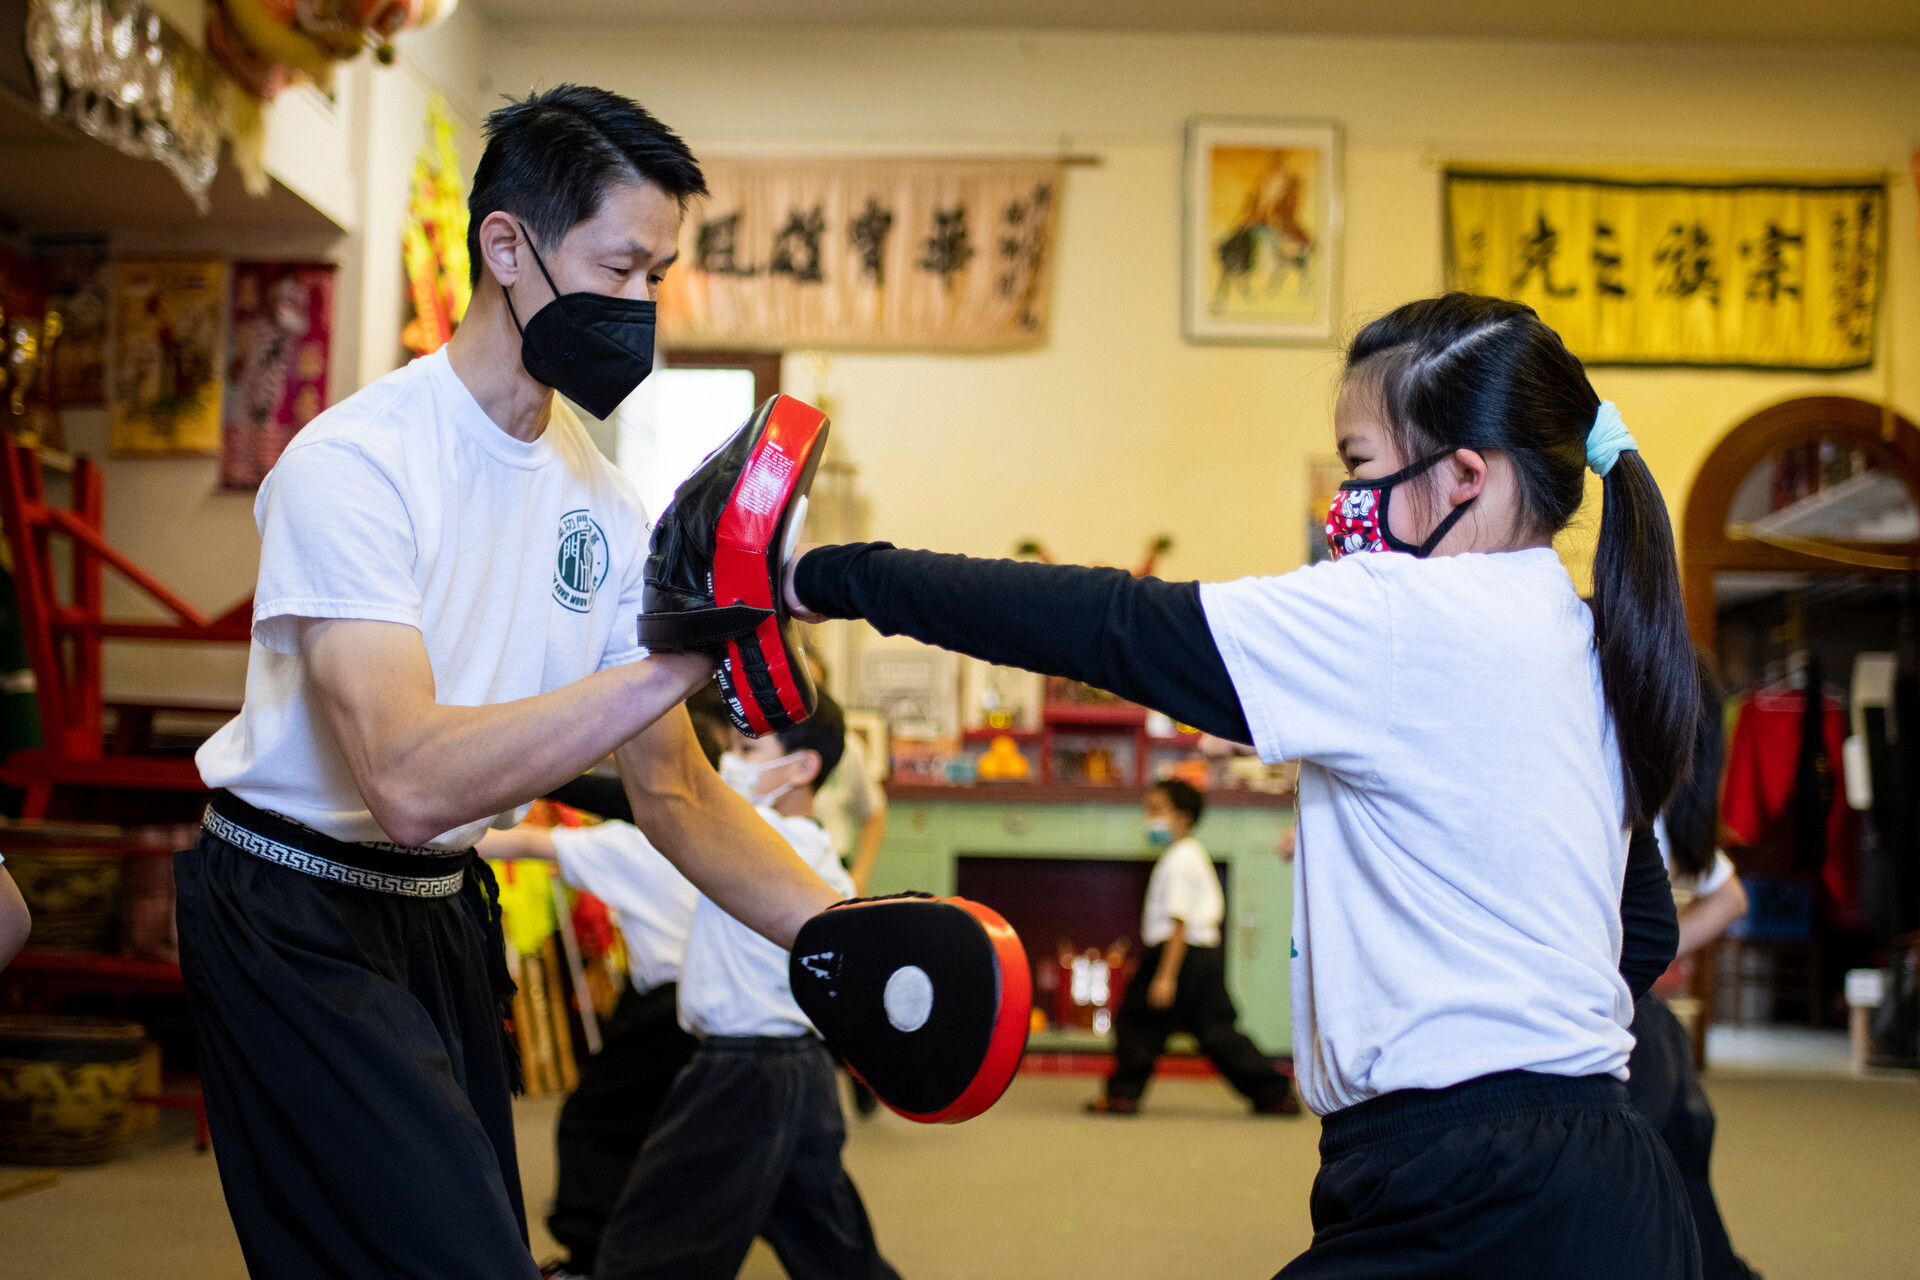 Kung fu instructor holds blocking pad while young girl student punches inside a kung fu studio